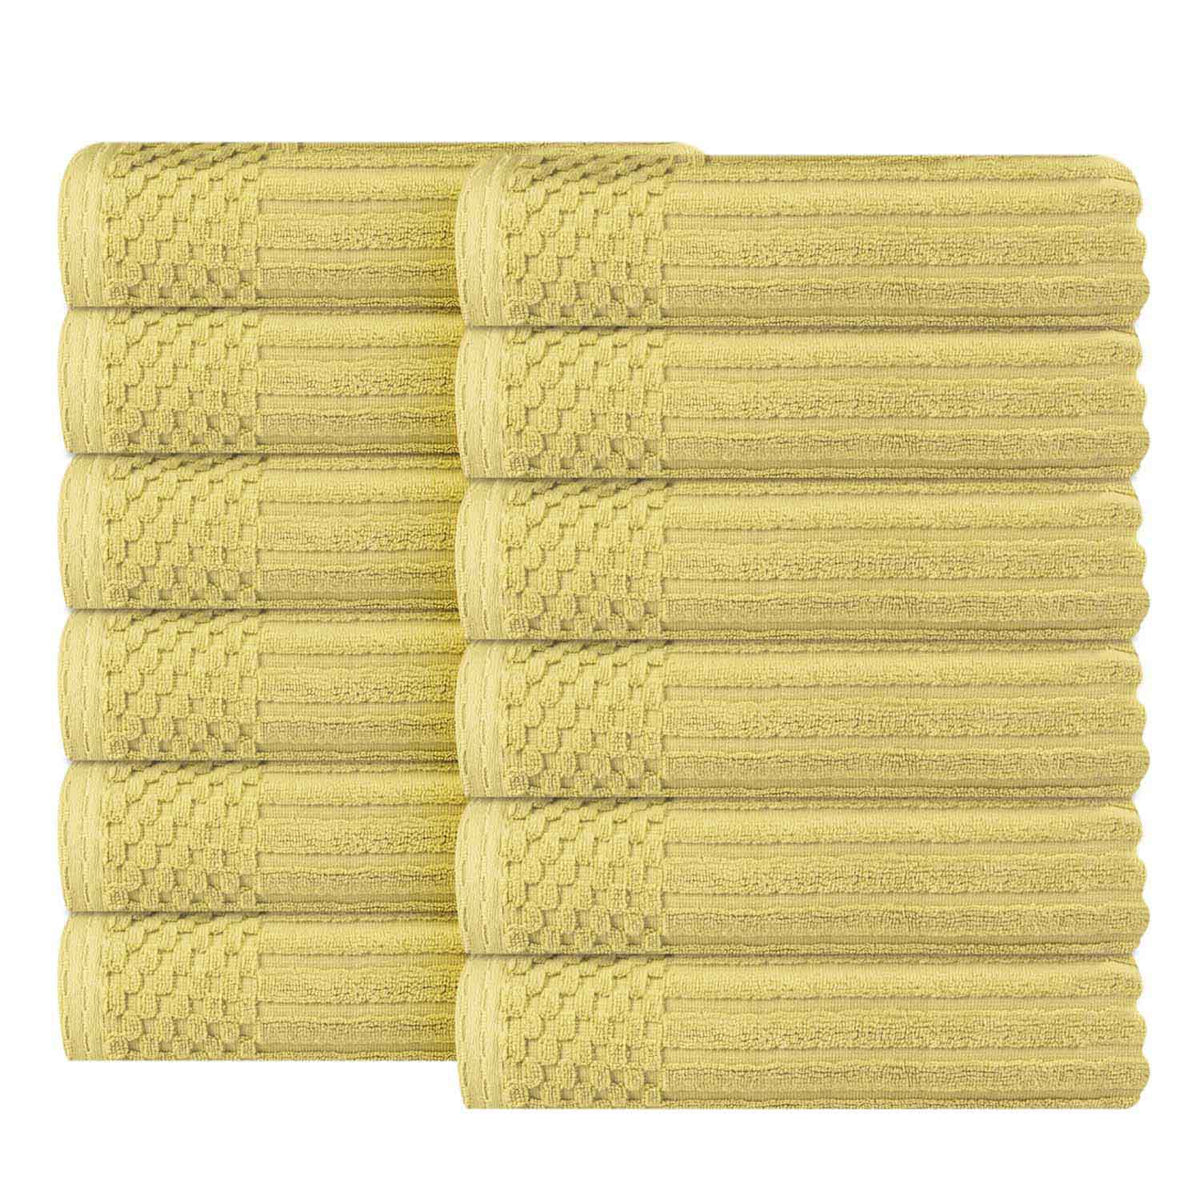 Soho Ribbed Cotton Absorbent Face Towel / Washcloth Set of 12 - GoldenMist